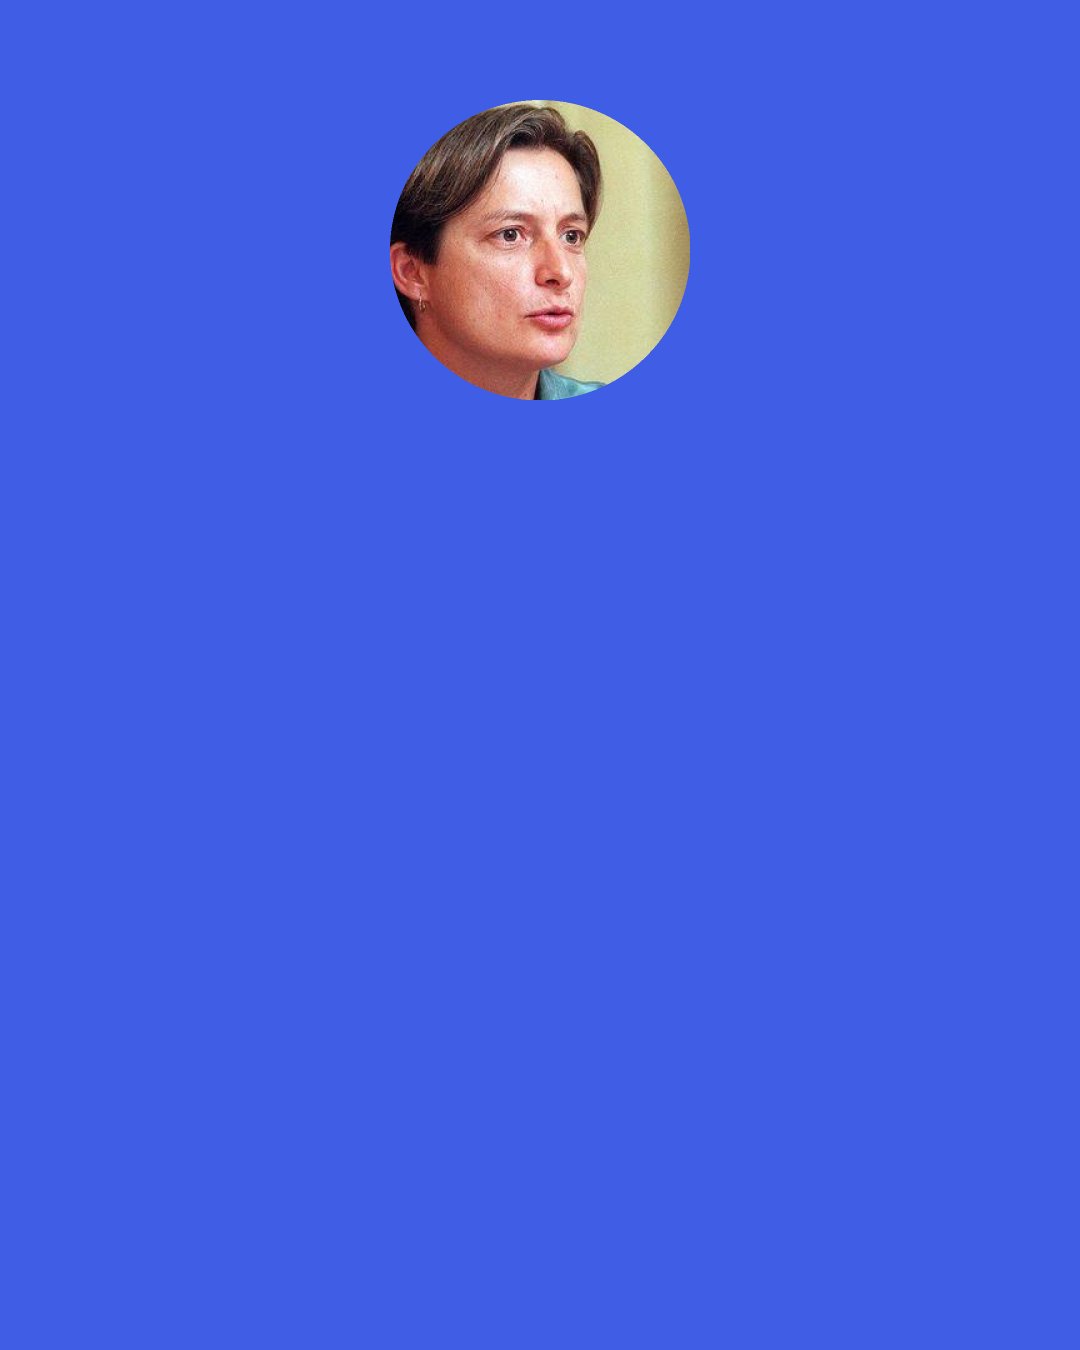 Judith Butler: Gender is not something that one is, it is something one does, an act… a doing rather than a being.